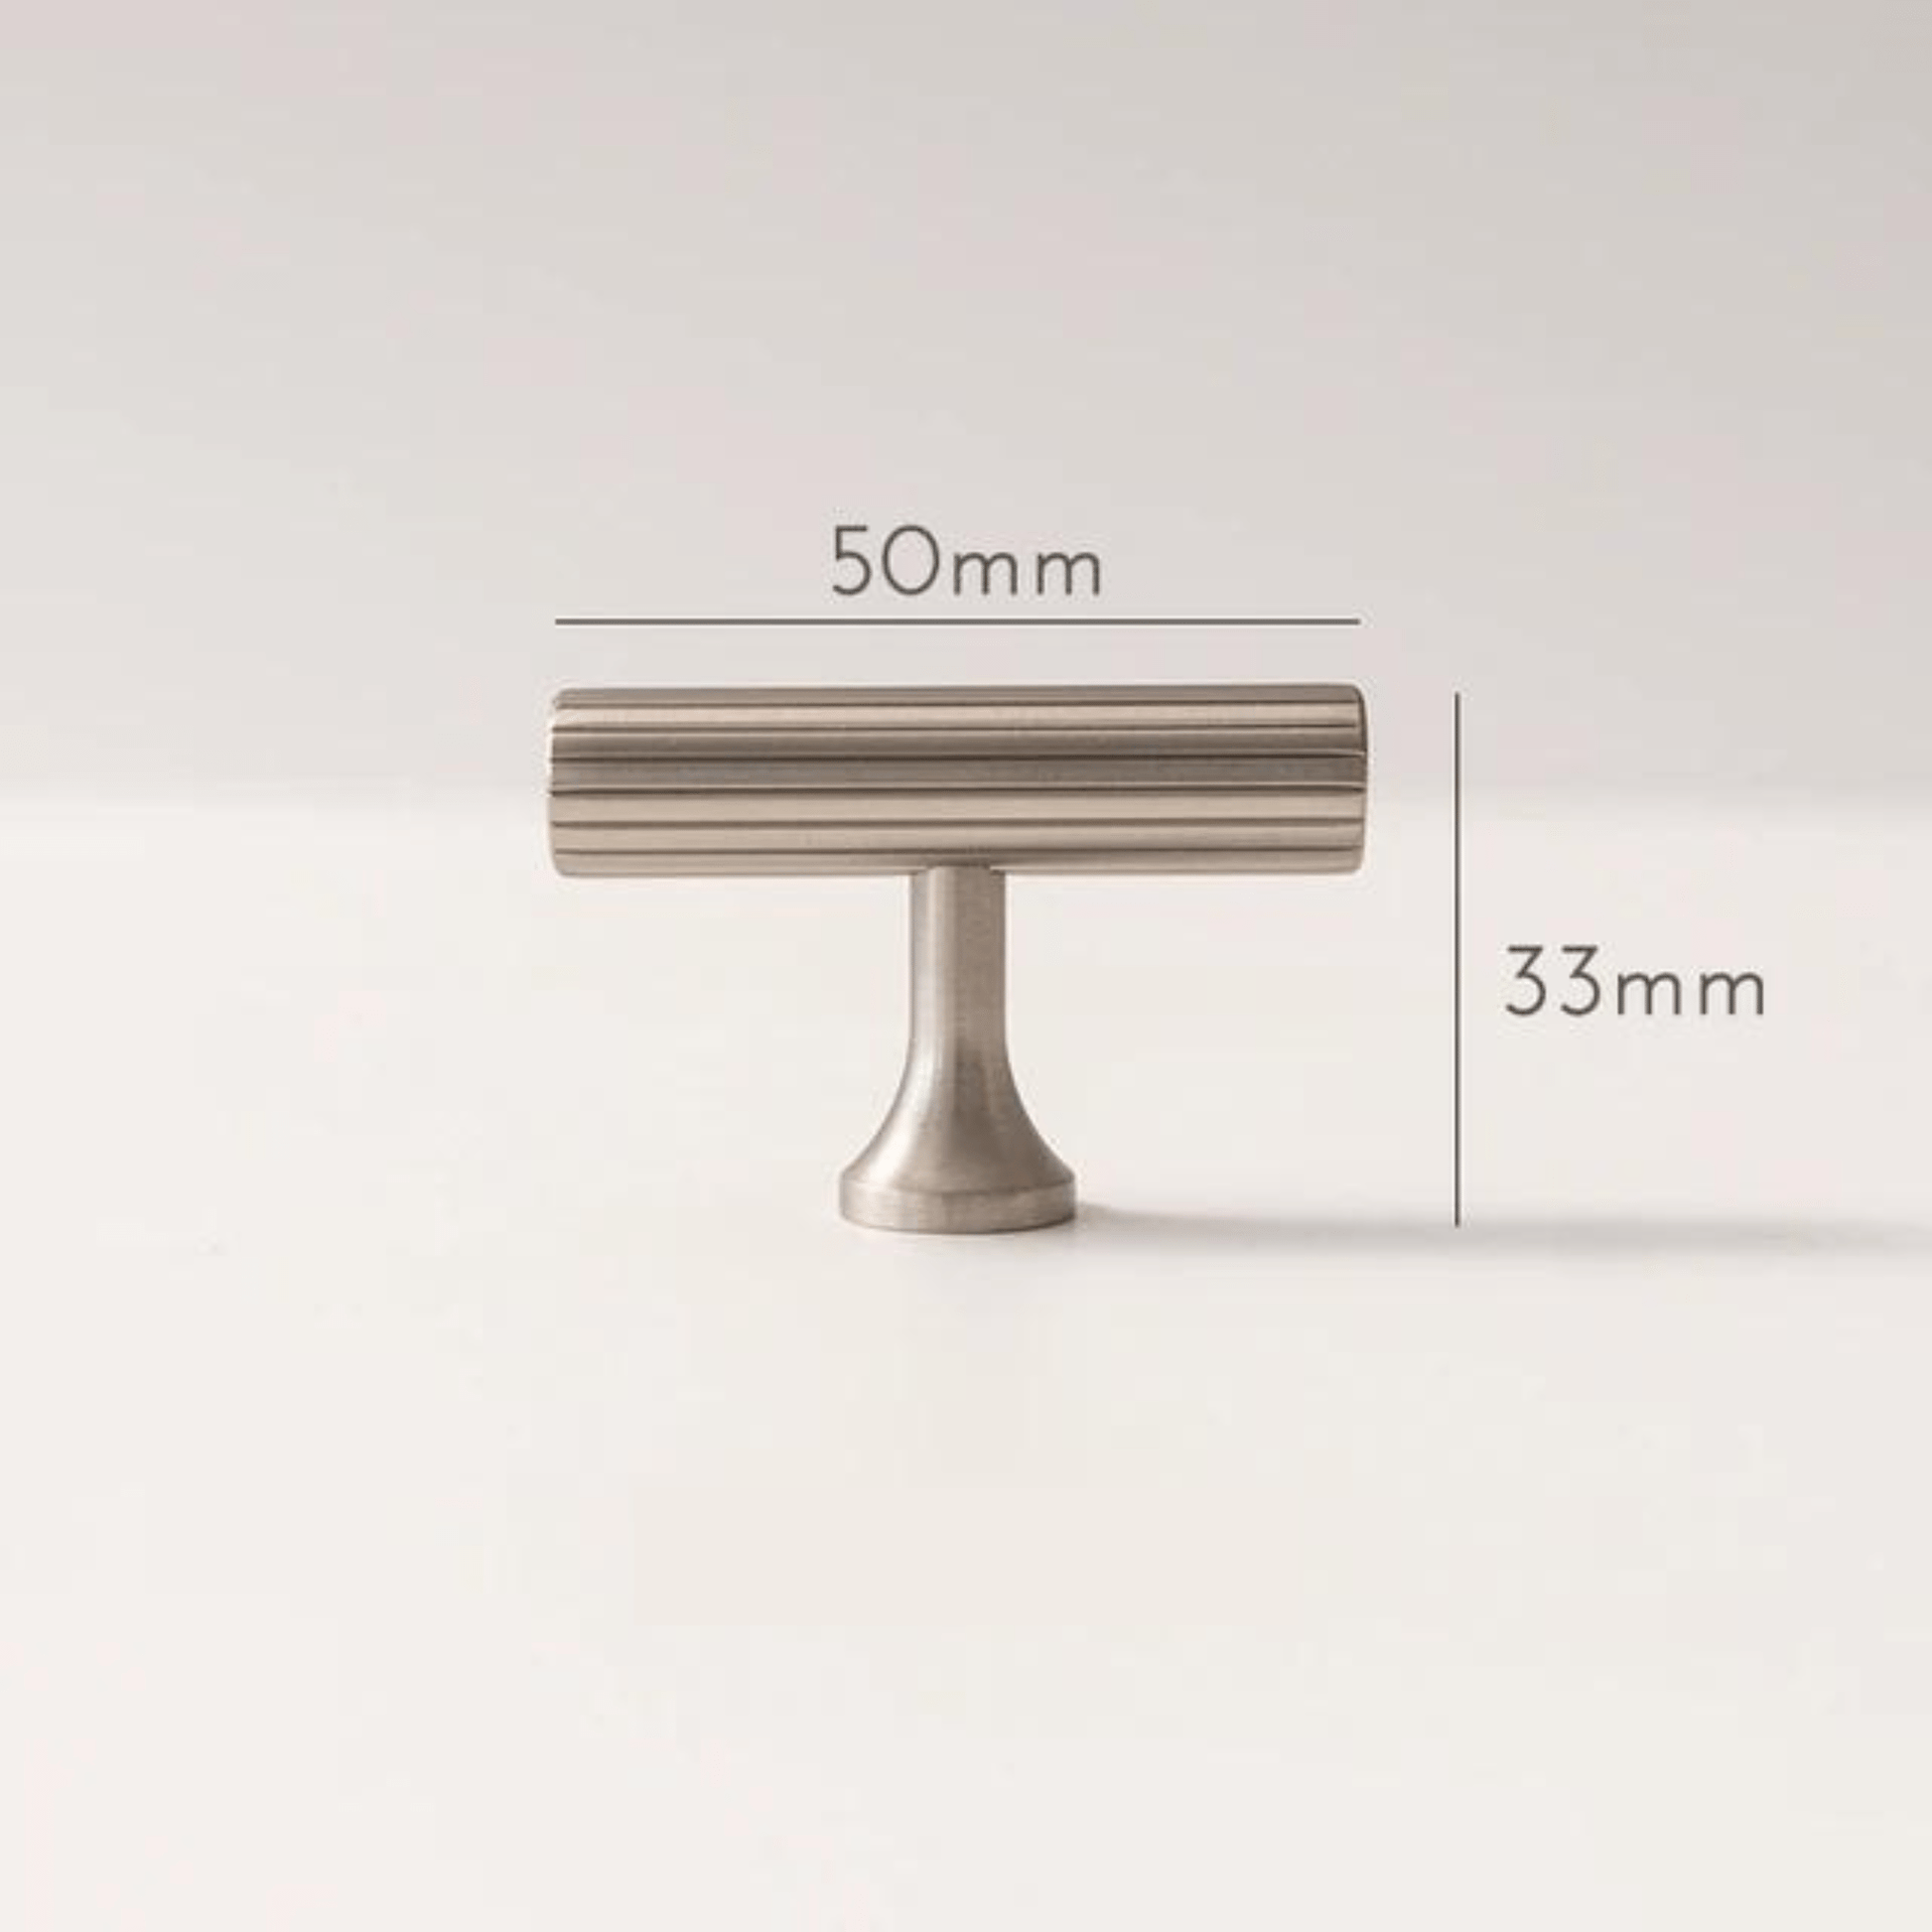 Cabinet Knobs & Handles Bayside Luxe - Hawthorn Brushed Nickel Brass Handles